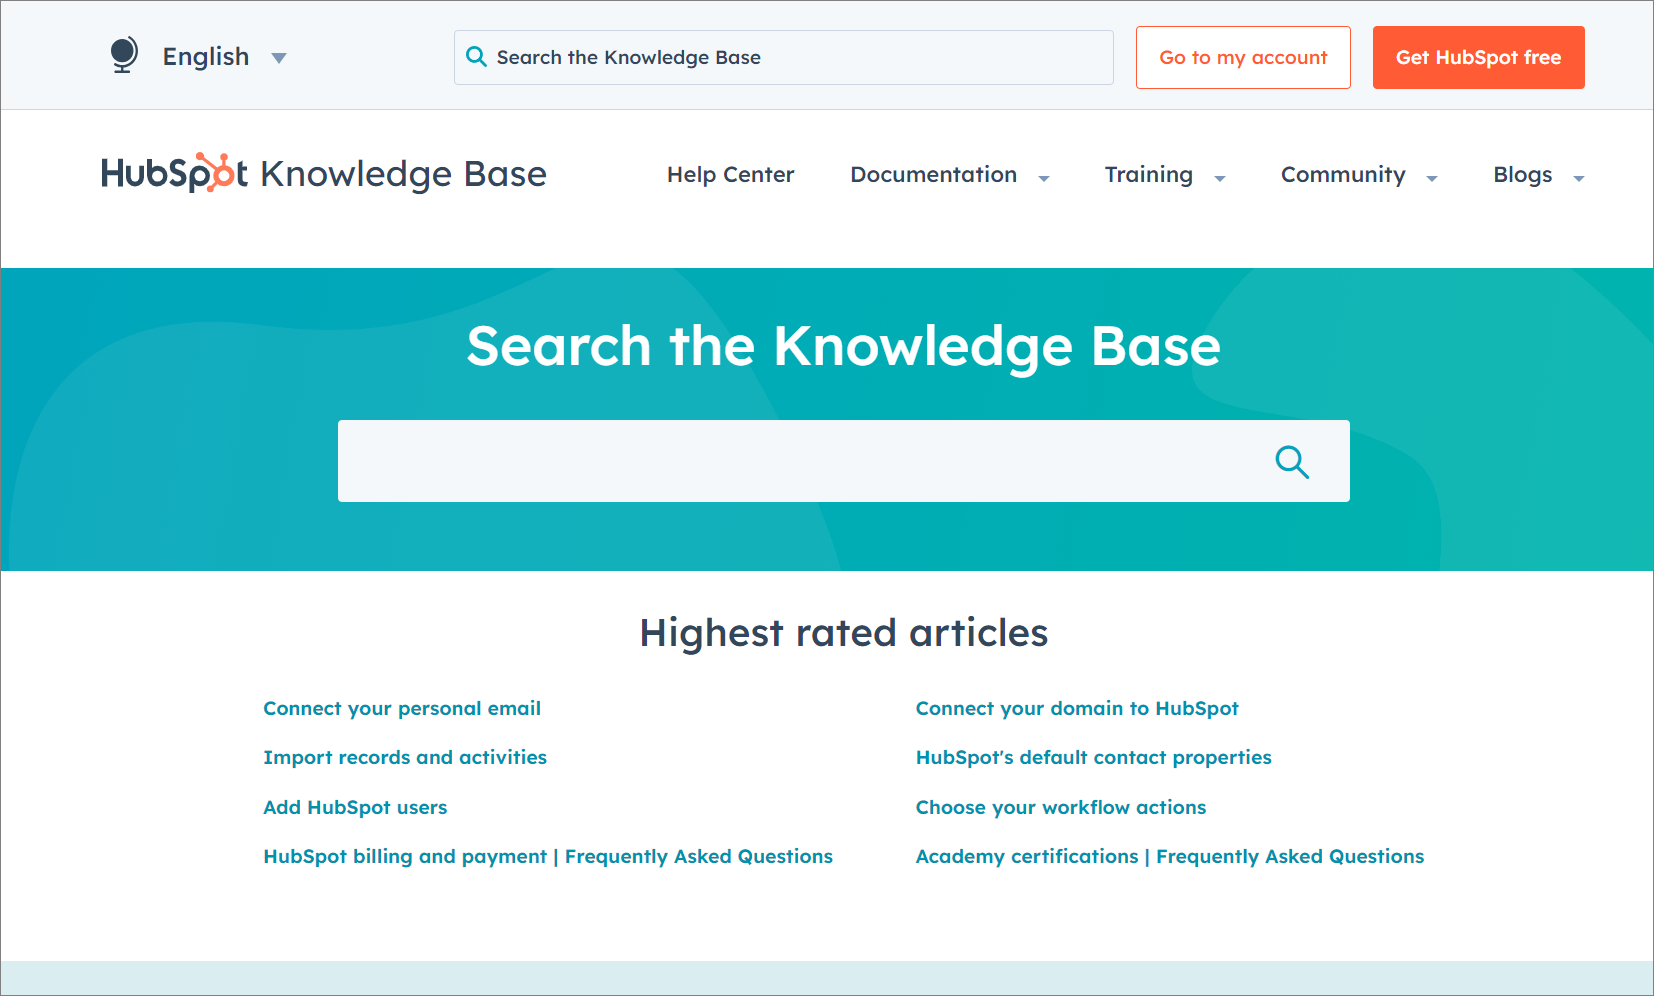 Screenshot of a Hubspot knowledge base which is part of their help desk solution